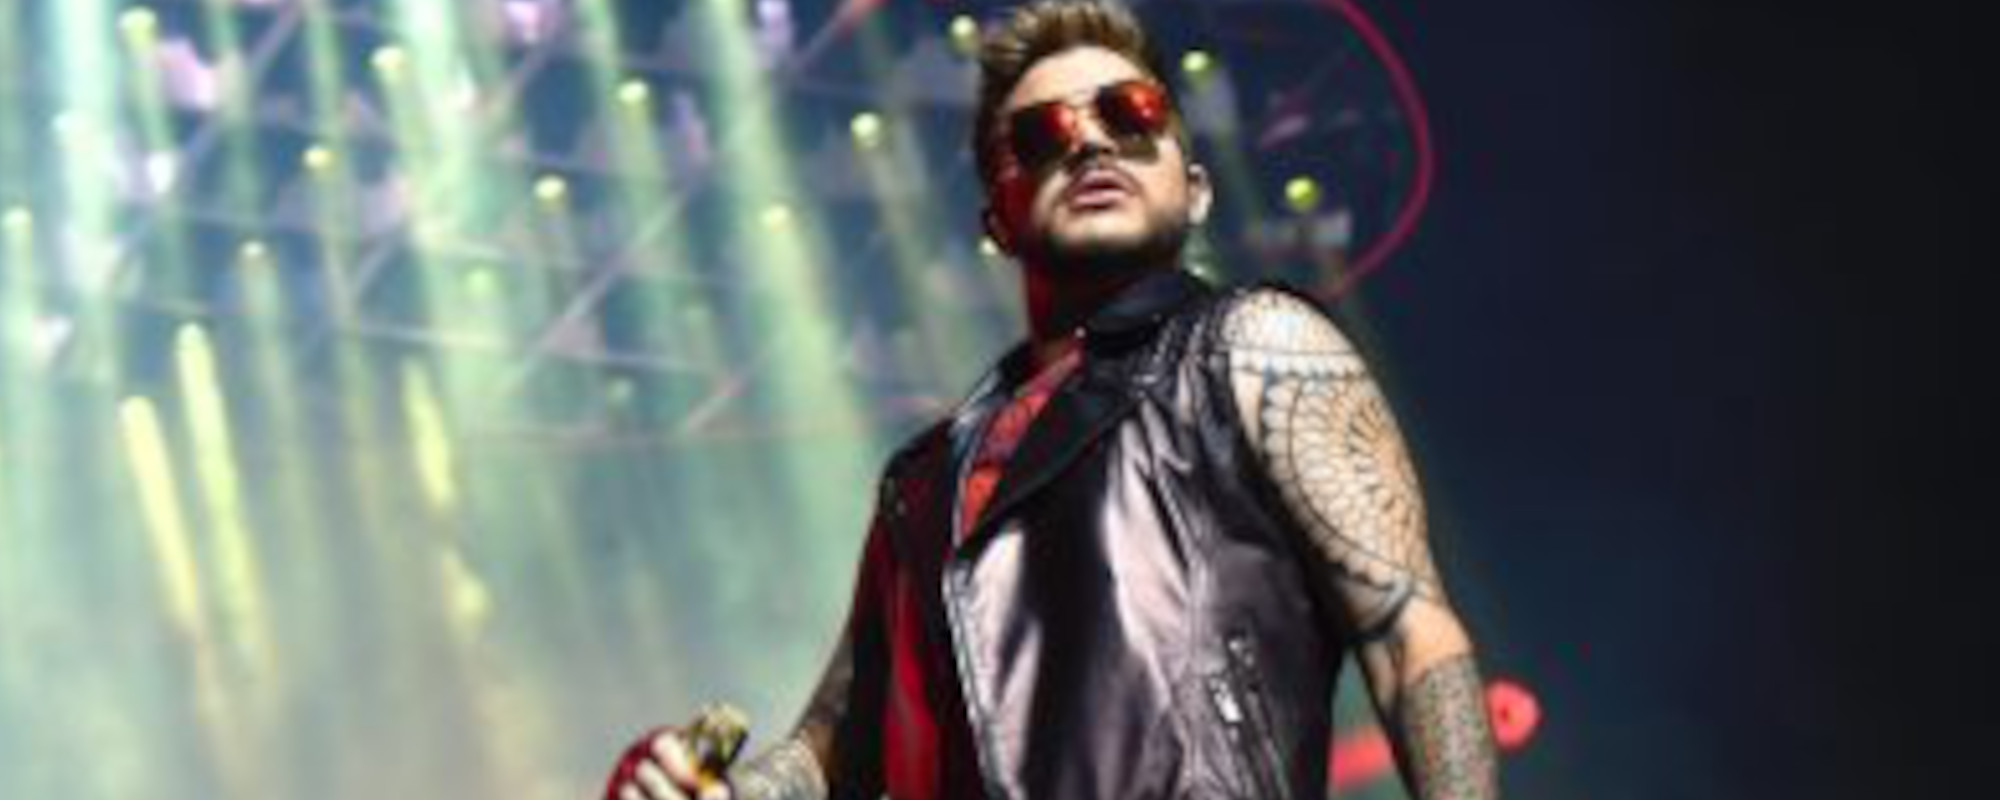 Adam Lambert Shares Cover of Bonnie Tyler’s “Holding Out for a Hero”